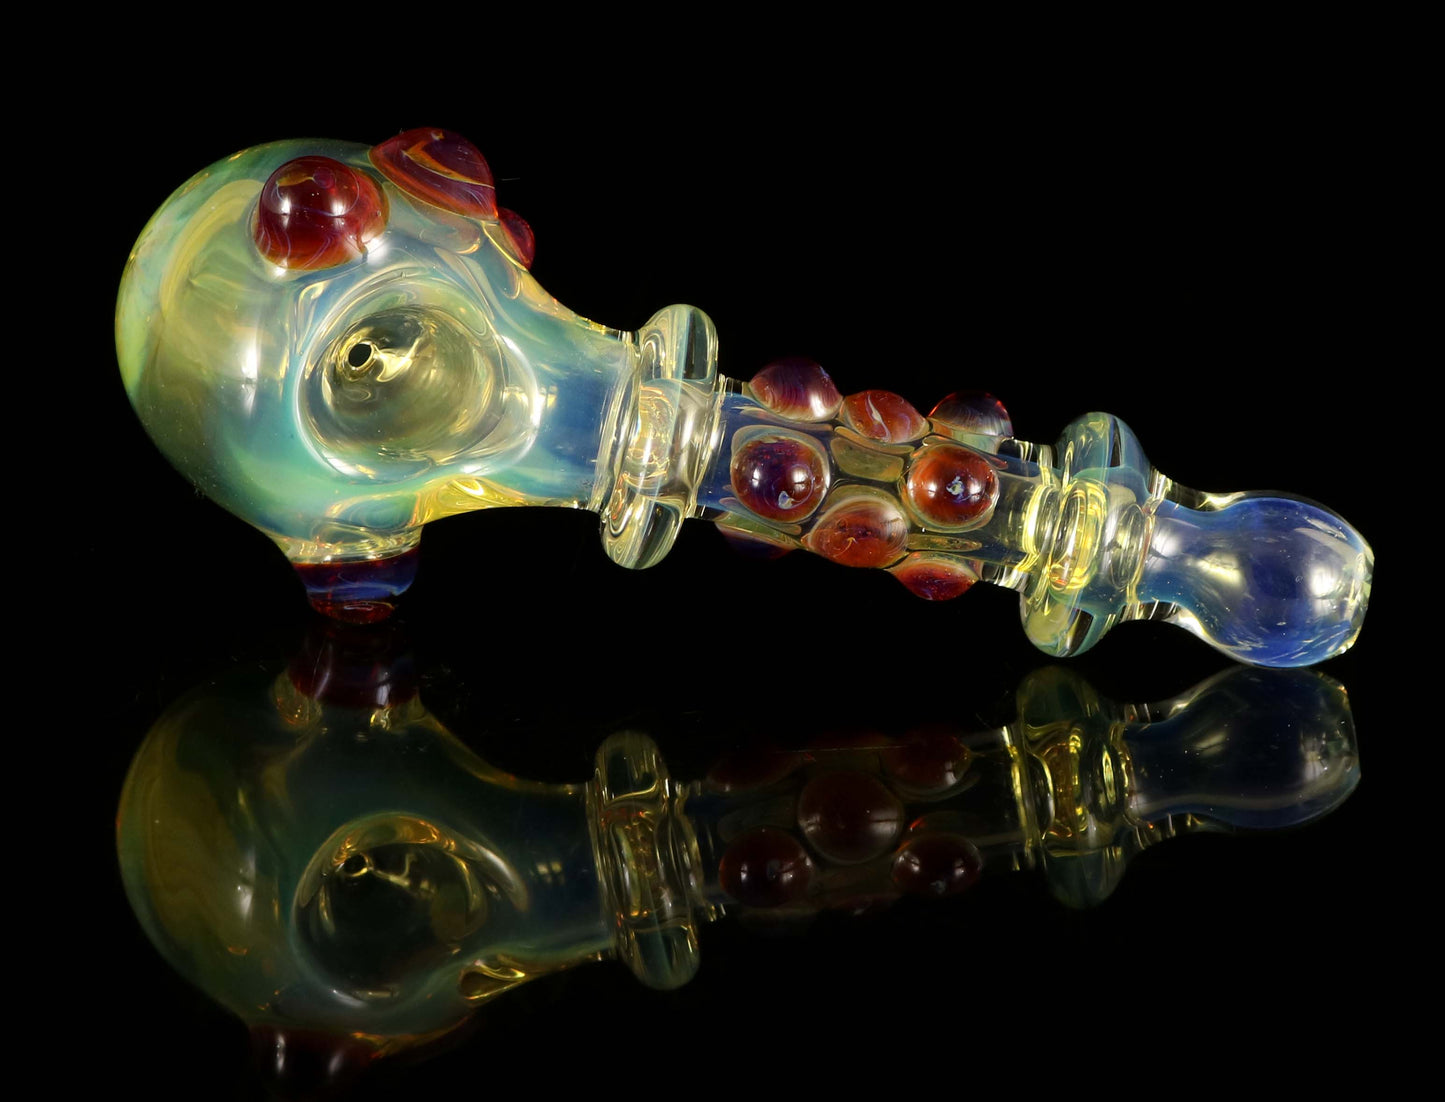 Drooper Spoon pipe by, Phil_pgw